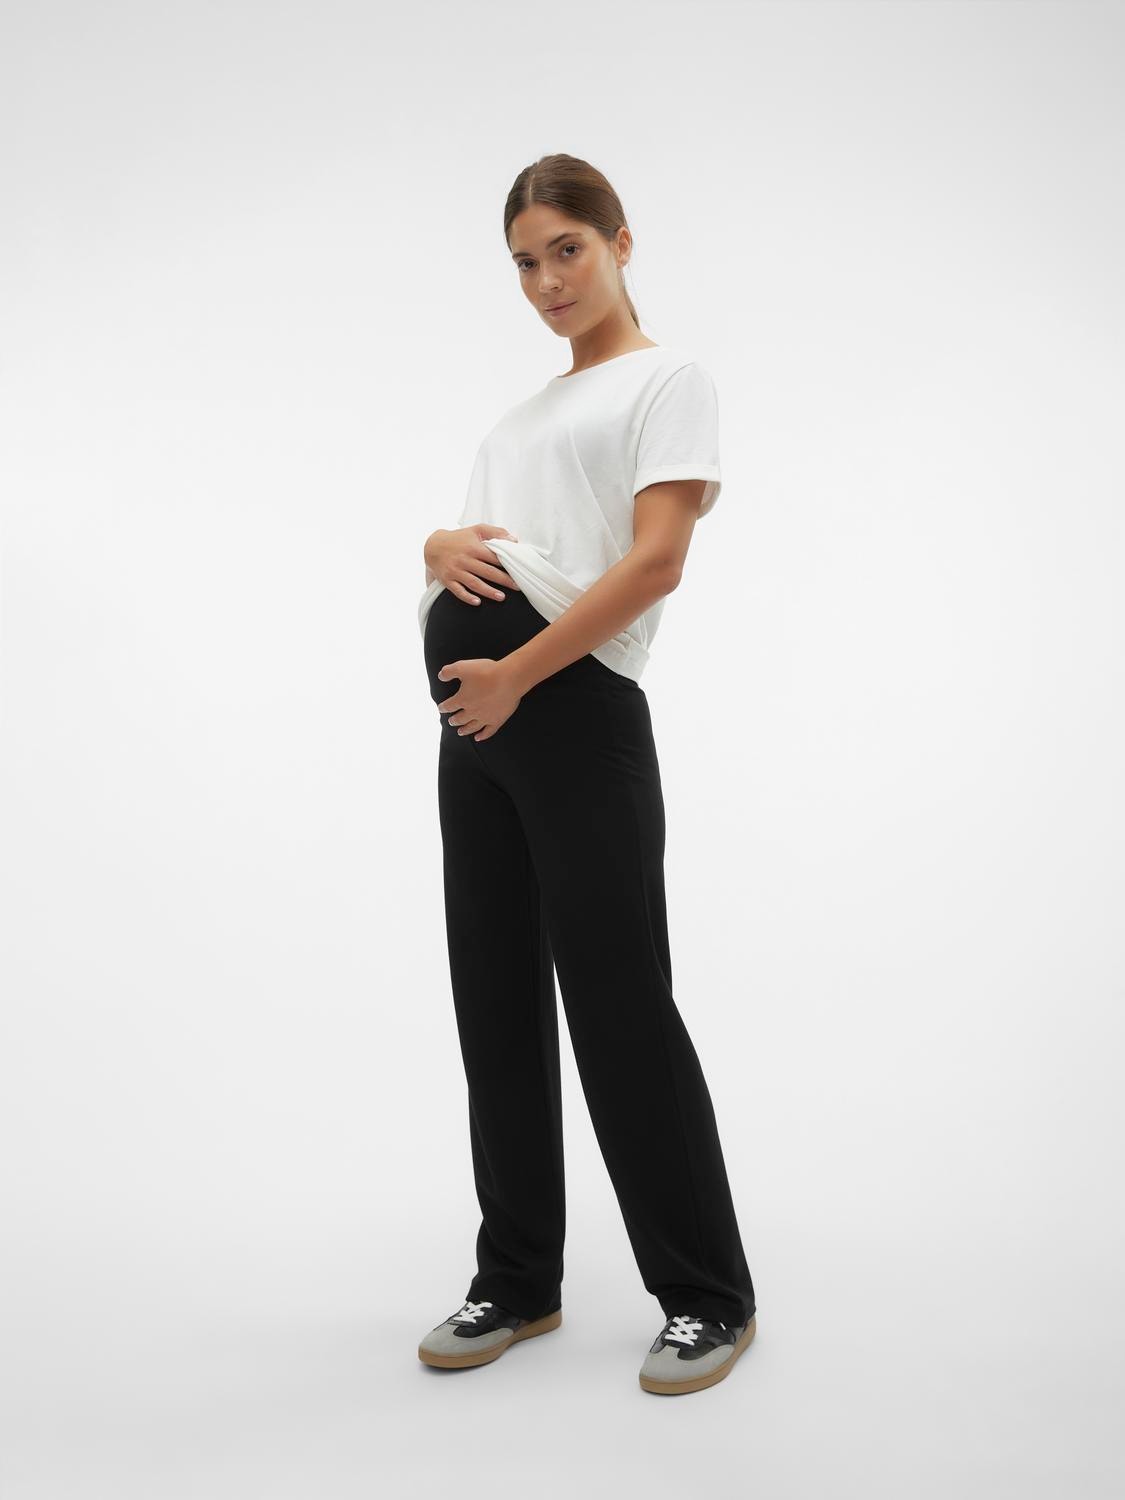 MAMA.LICIOUS Straight Fit High rise Trousers -Black - 20017358